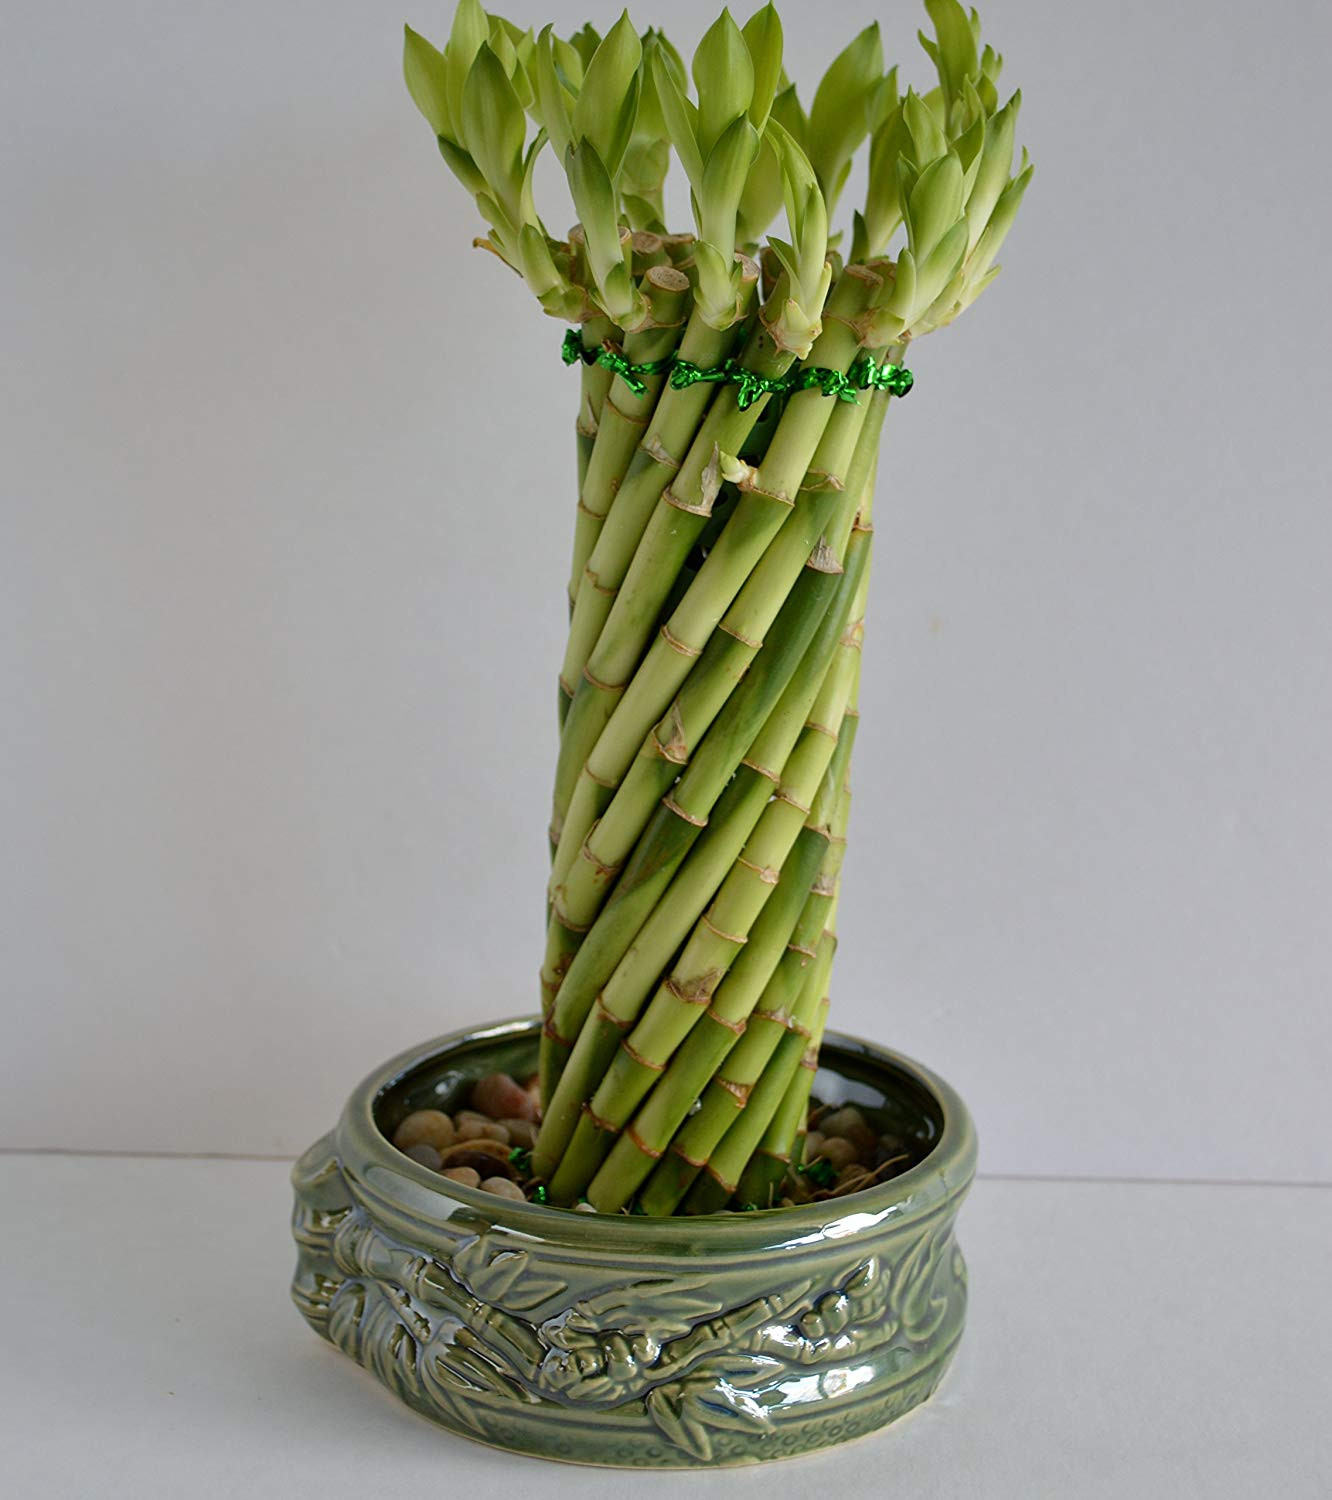 green bamboo sticks for vases of amazon com lucky bamboo twisted design 8 10 set with a handmade with regard to amazon com lucky bamboo twisted design 8 10 set with a handmade ceramic vase from jm bamboo garden outdoor